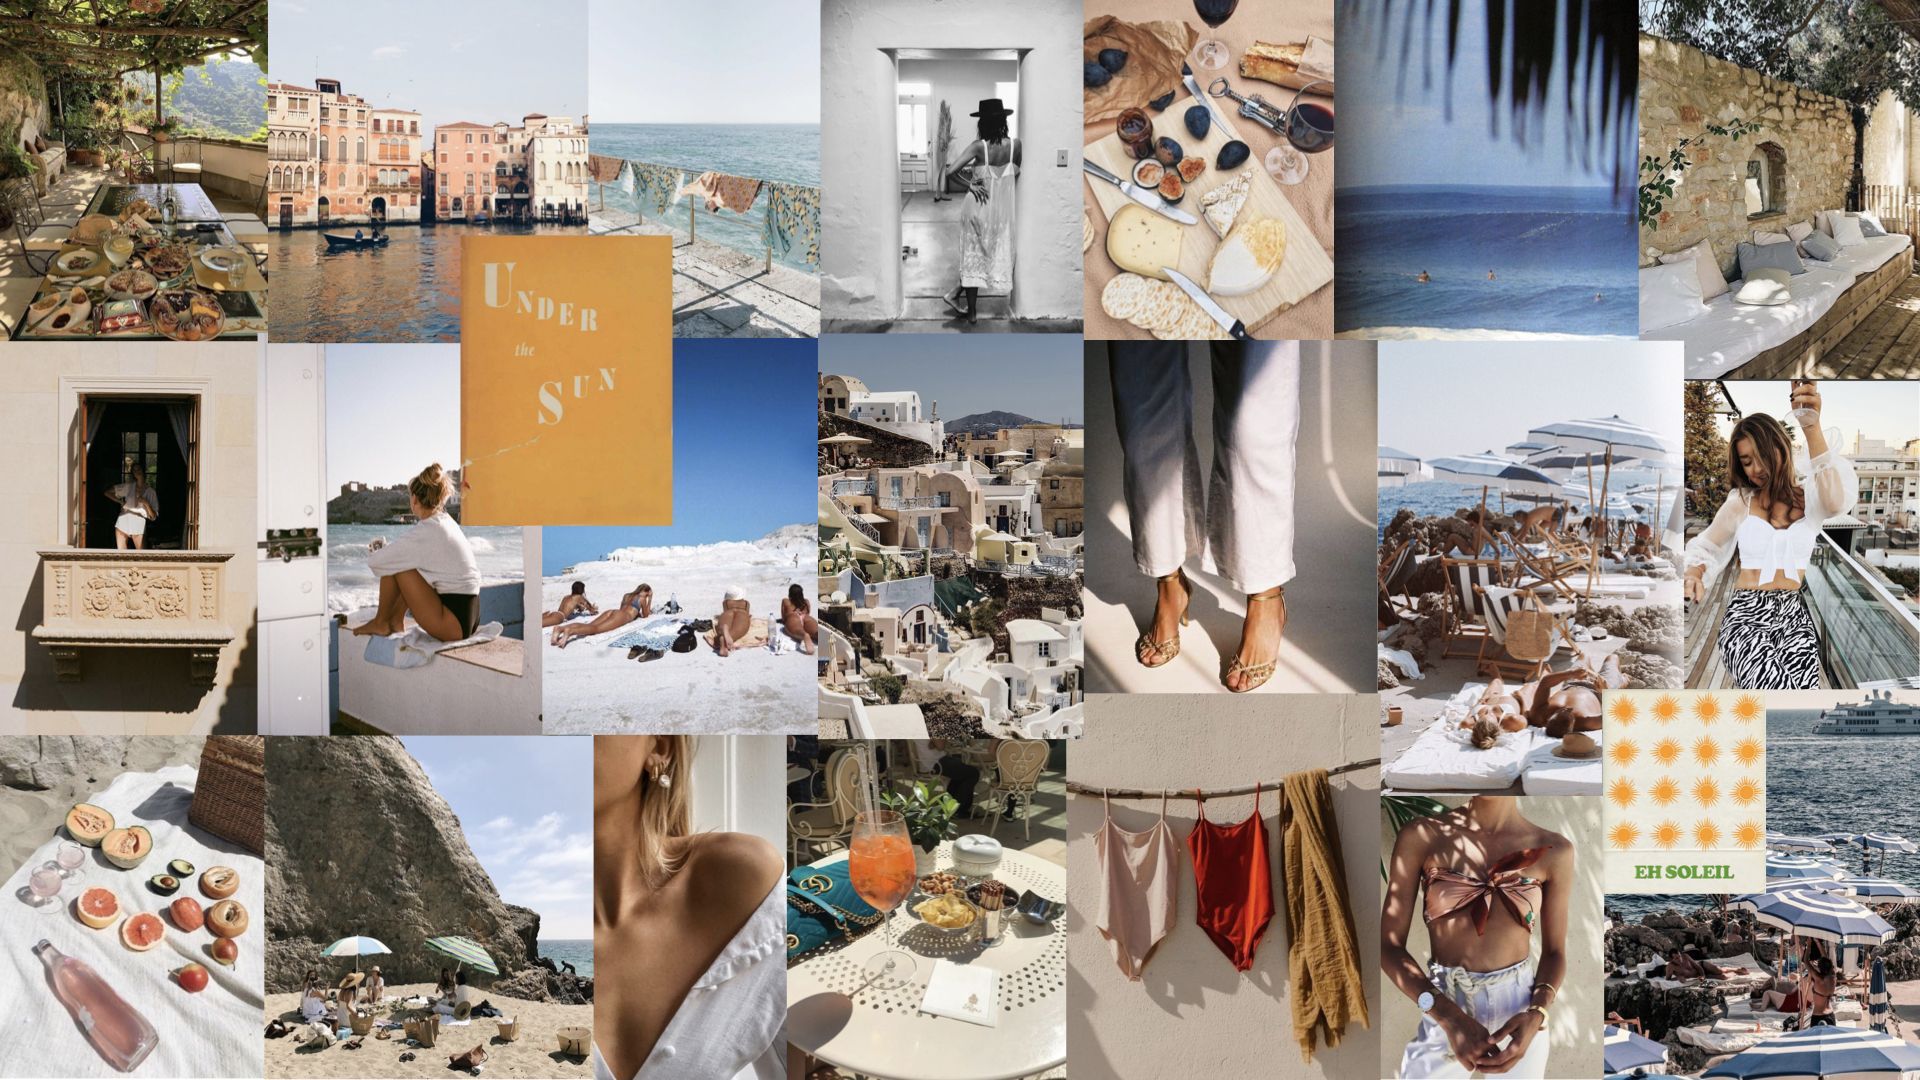 A collage of photos of a beach, boats, food, and people. - Spring